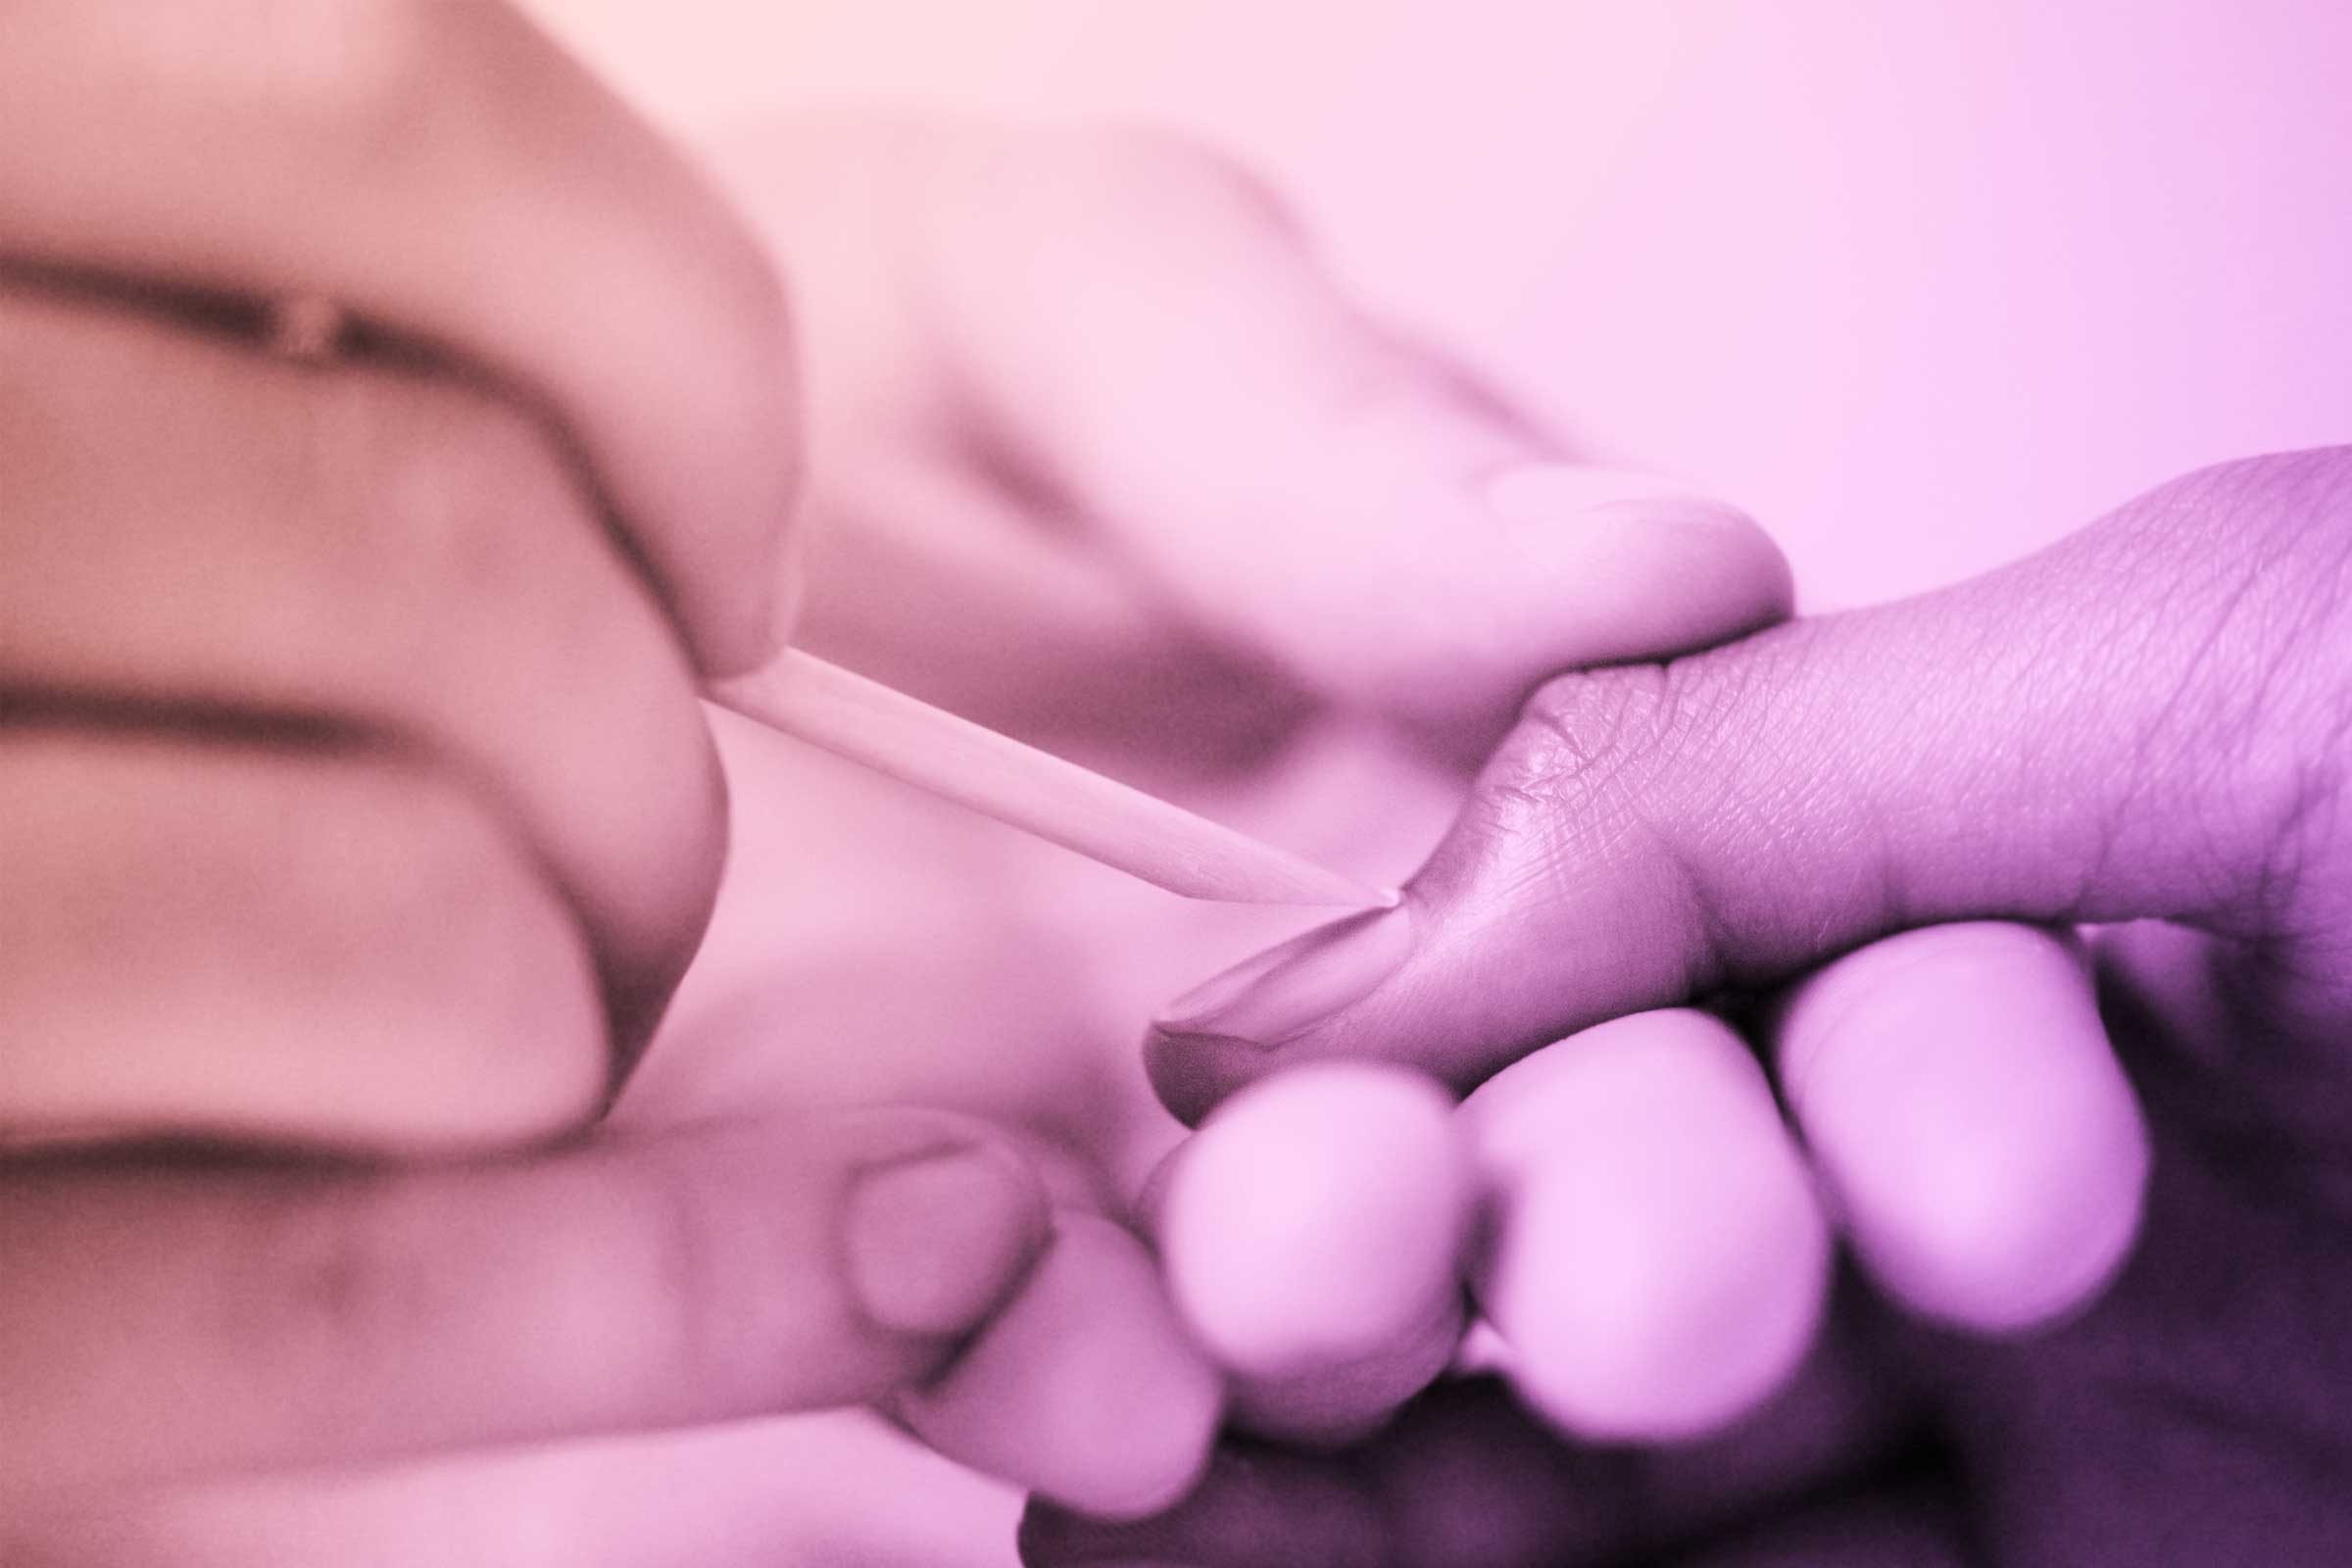 Get Healthy Nails: 14 Tips to Try | Reader's Digest